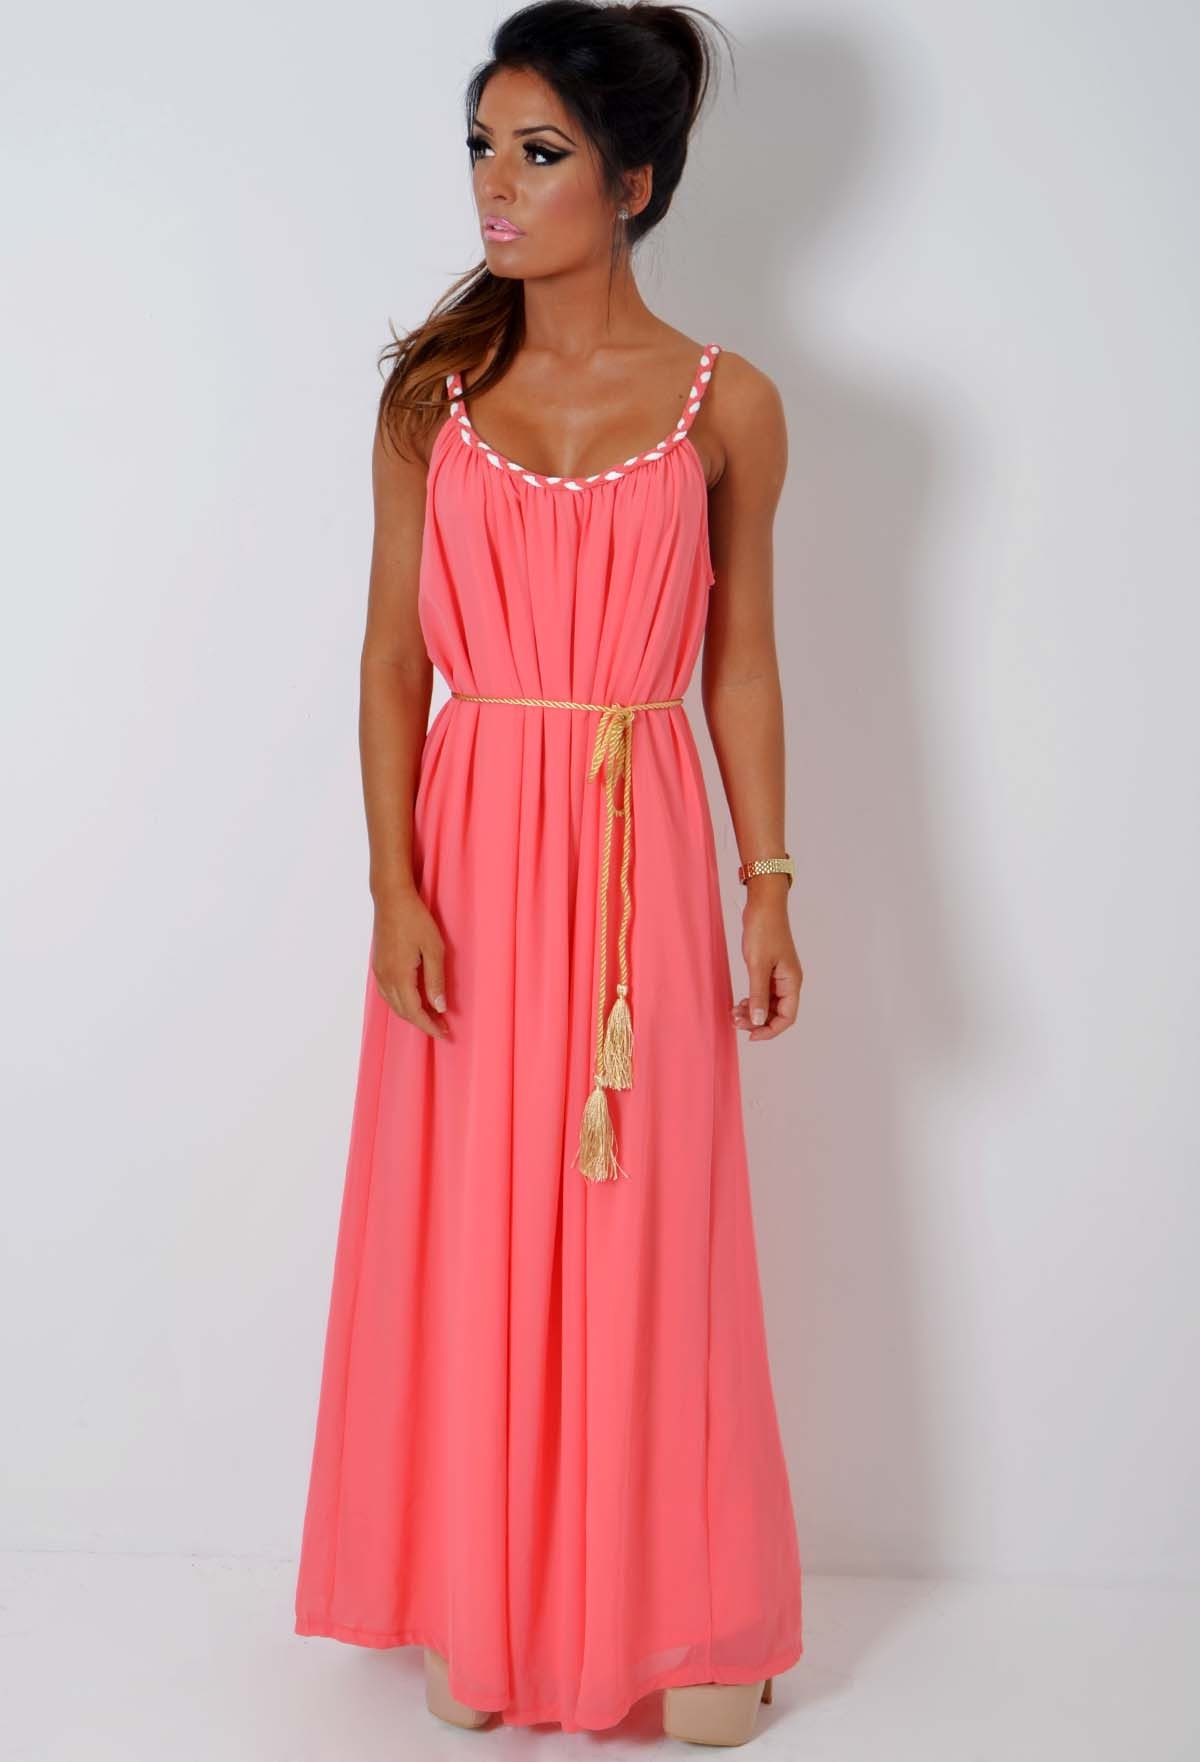 Coral Maxi Dress - Dressed Up Girl